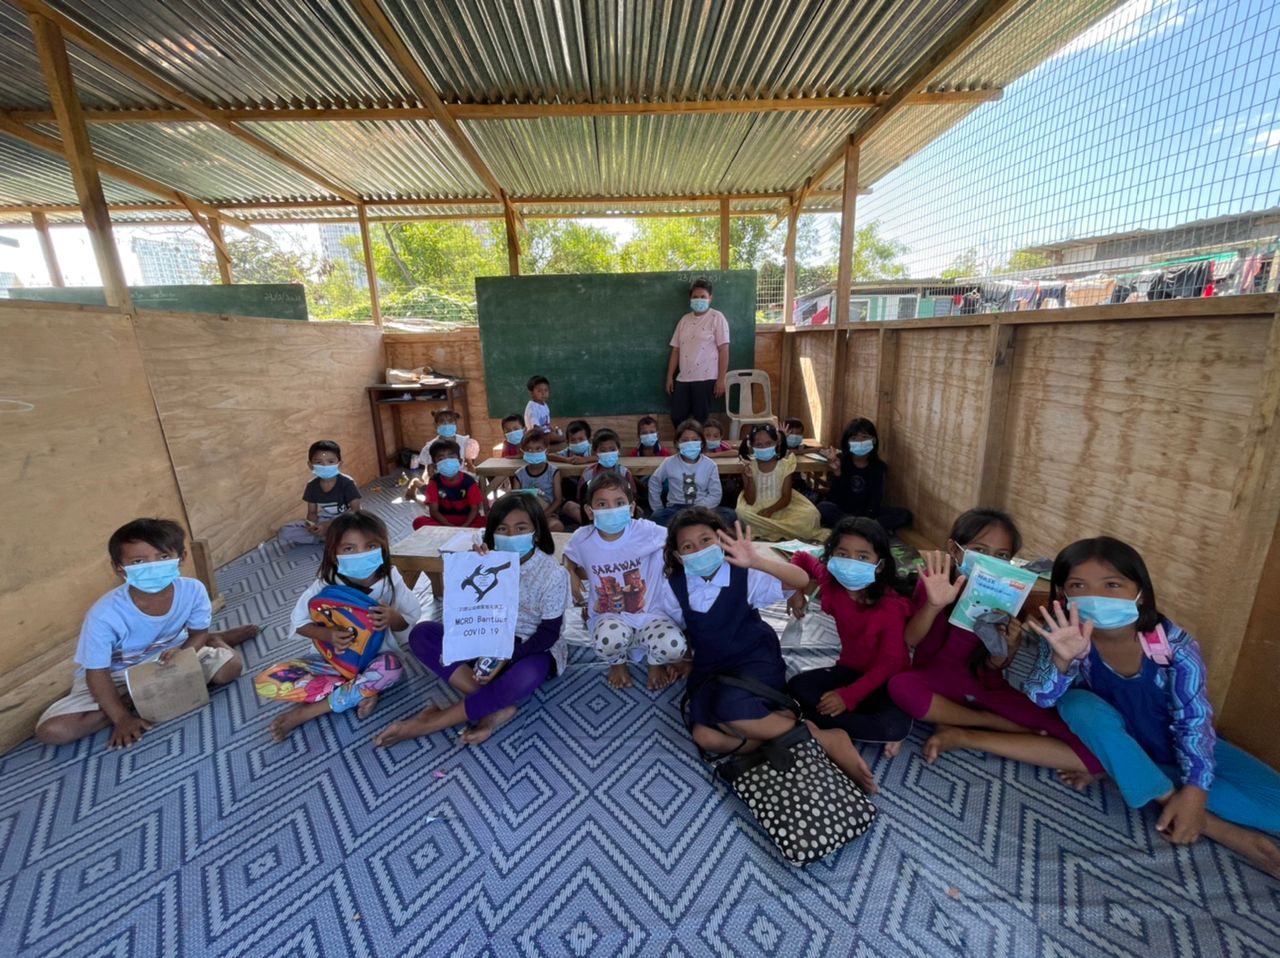 ElShaddai Centre provides children from stateless, migrant or refugee communities with something rare and often inaccessible to them: education. Photos from ElShaddai Refugee Learning Centre and Faithour.